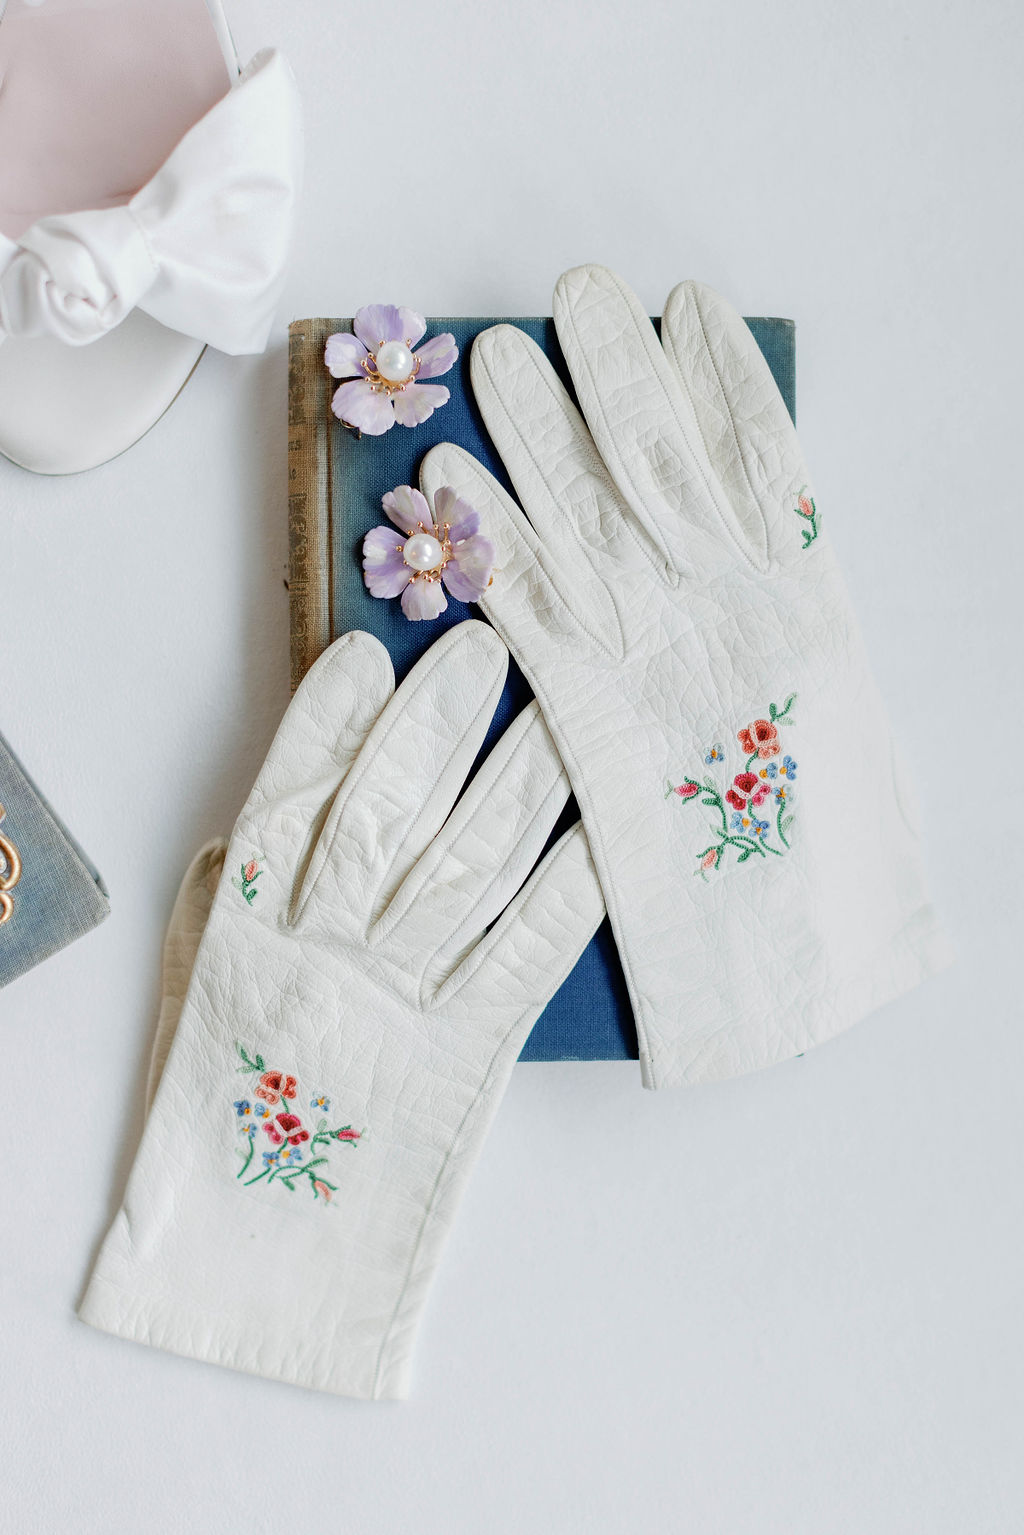 White Heirloom gloves with roses on them laid on top of an old vintage book along with a light purple floral earring with a pearl in the center taken at The Grand Lady Wedding Venue in Austin Texas. | Photo by Texas Wedding Photographer Sarah Block of Sarah Block Photography